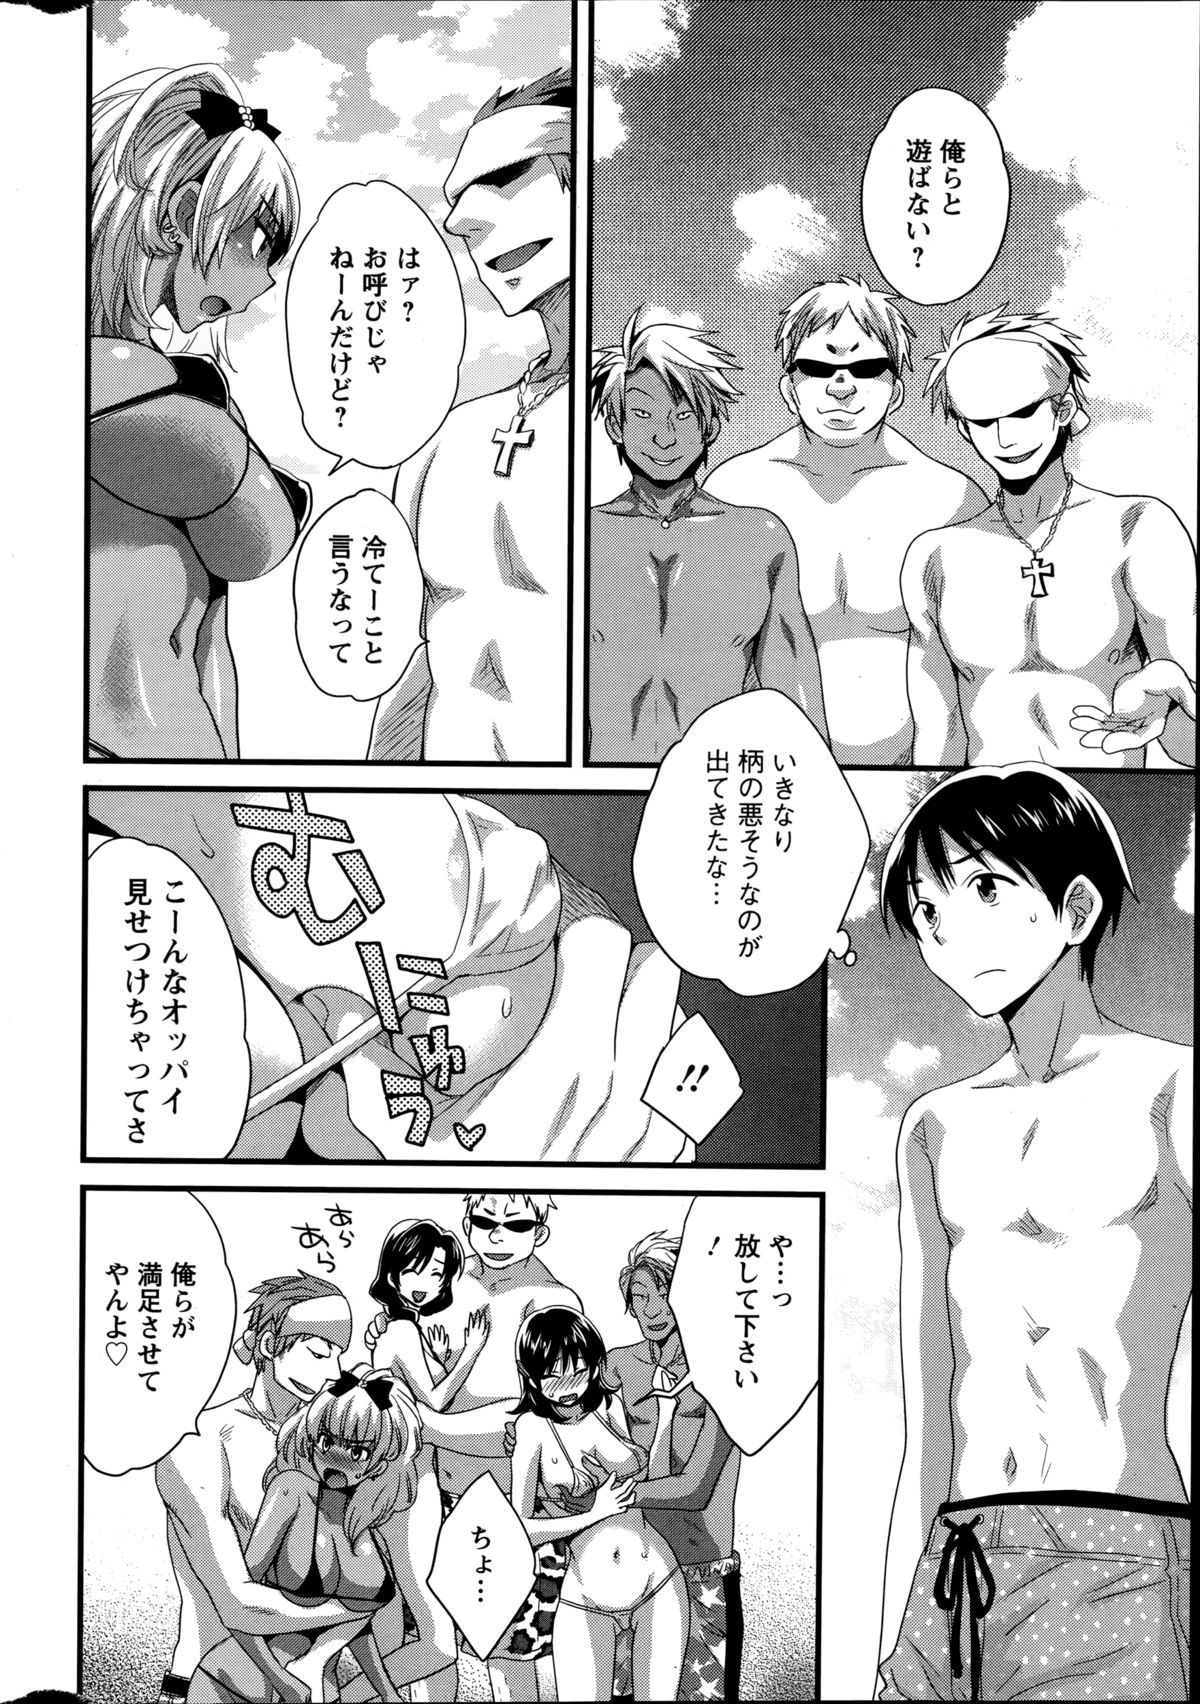 Action Pizazz 2014-09 page 10 full